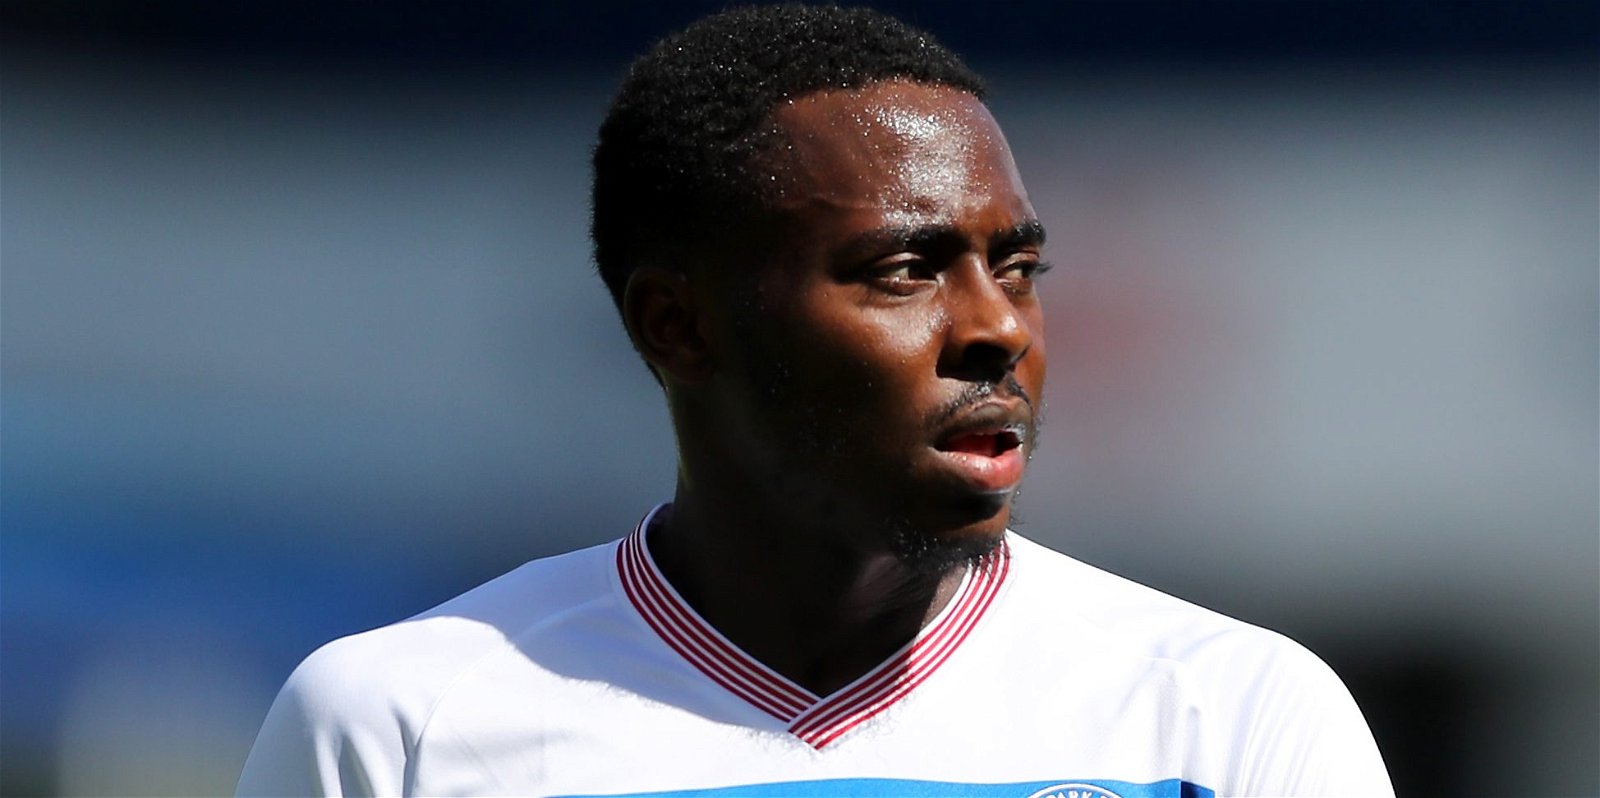 QPR, QPR prepared to offer key player contract &#8216;ultimatum&#8217;